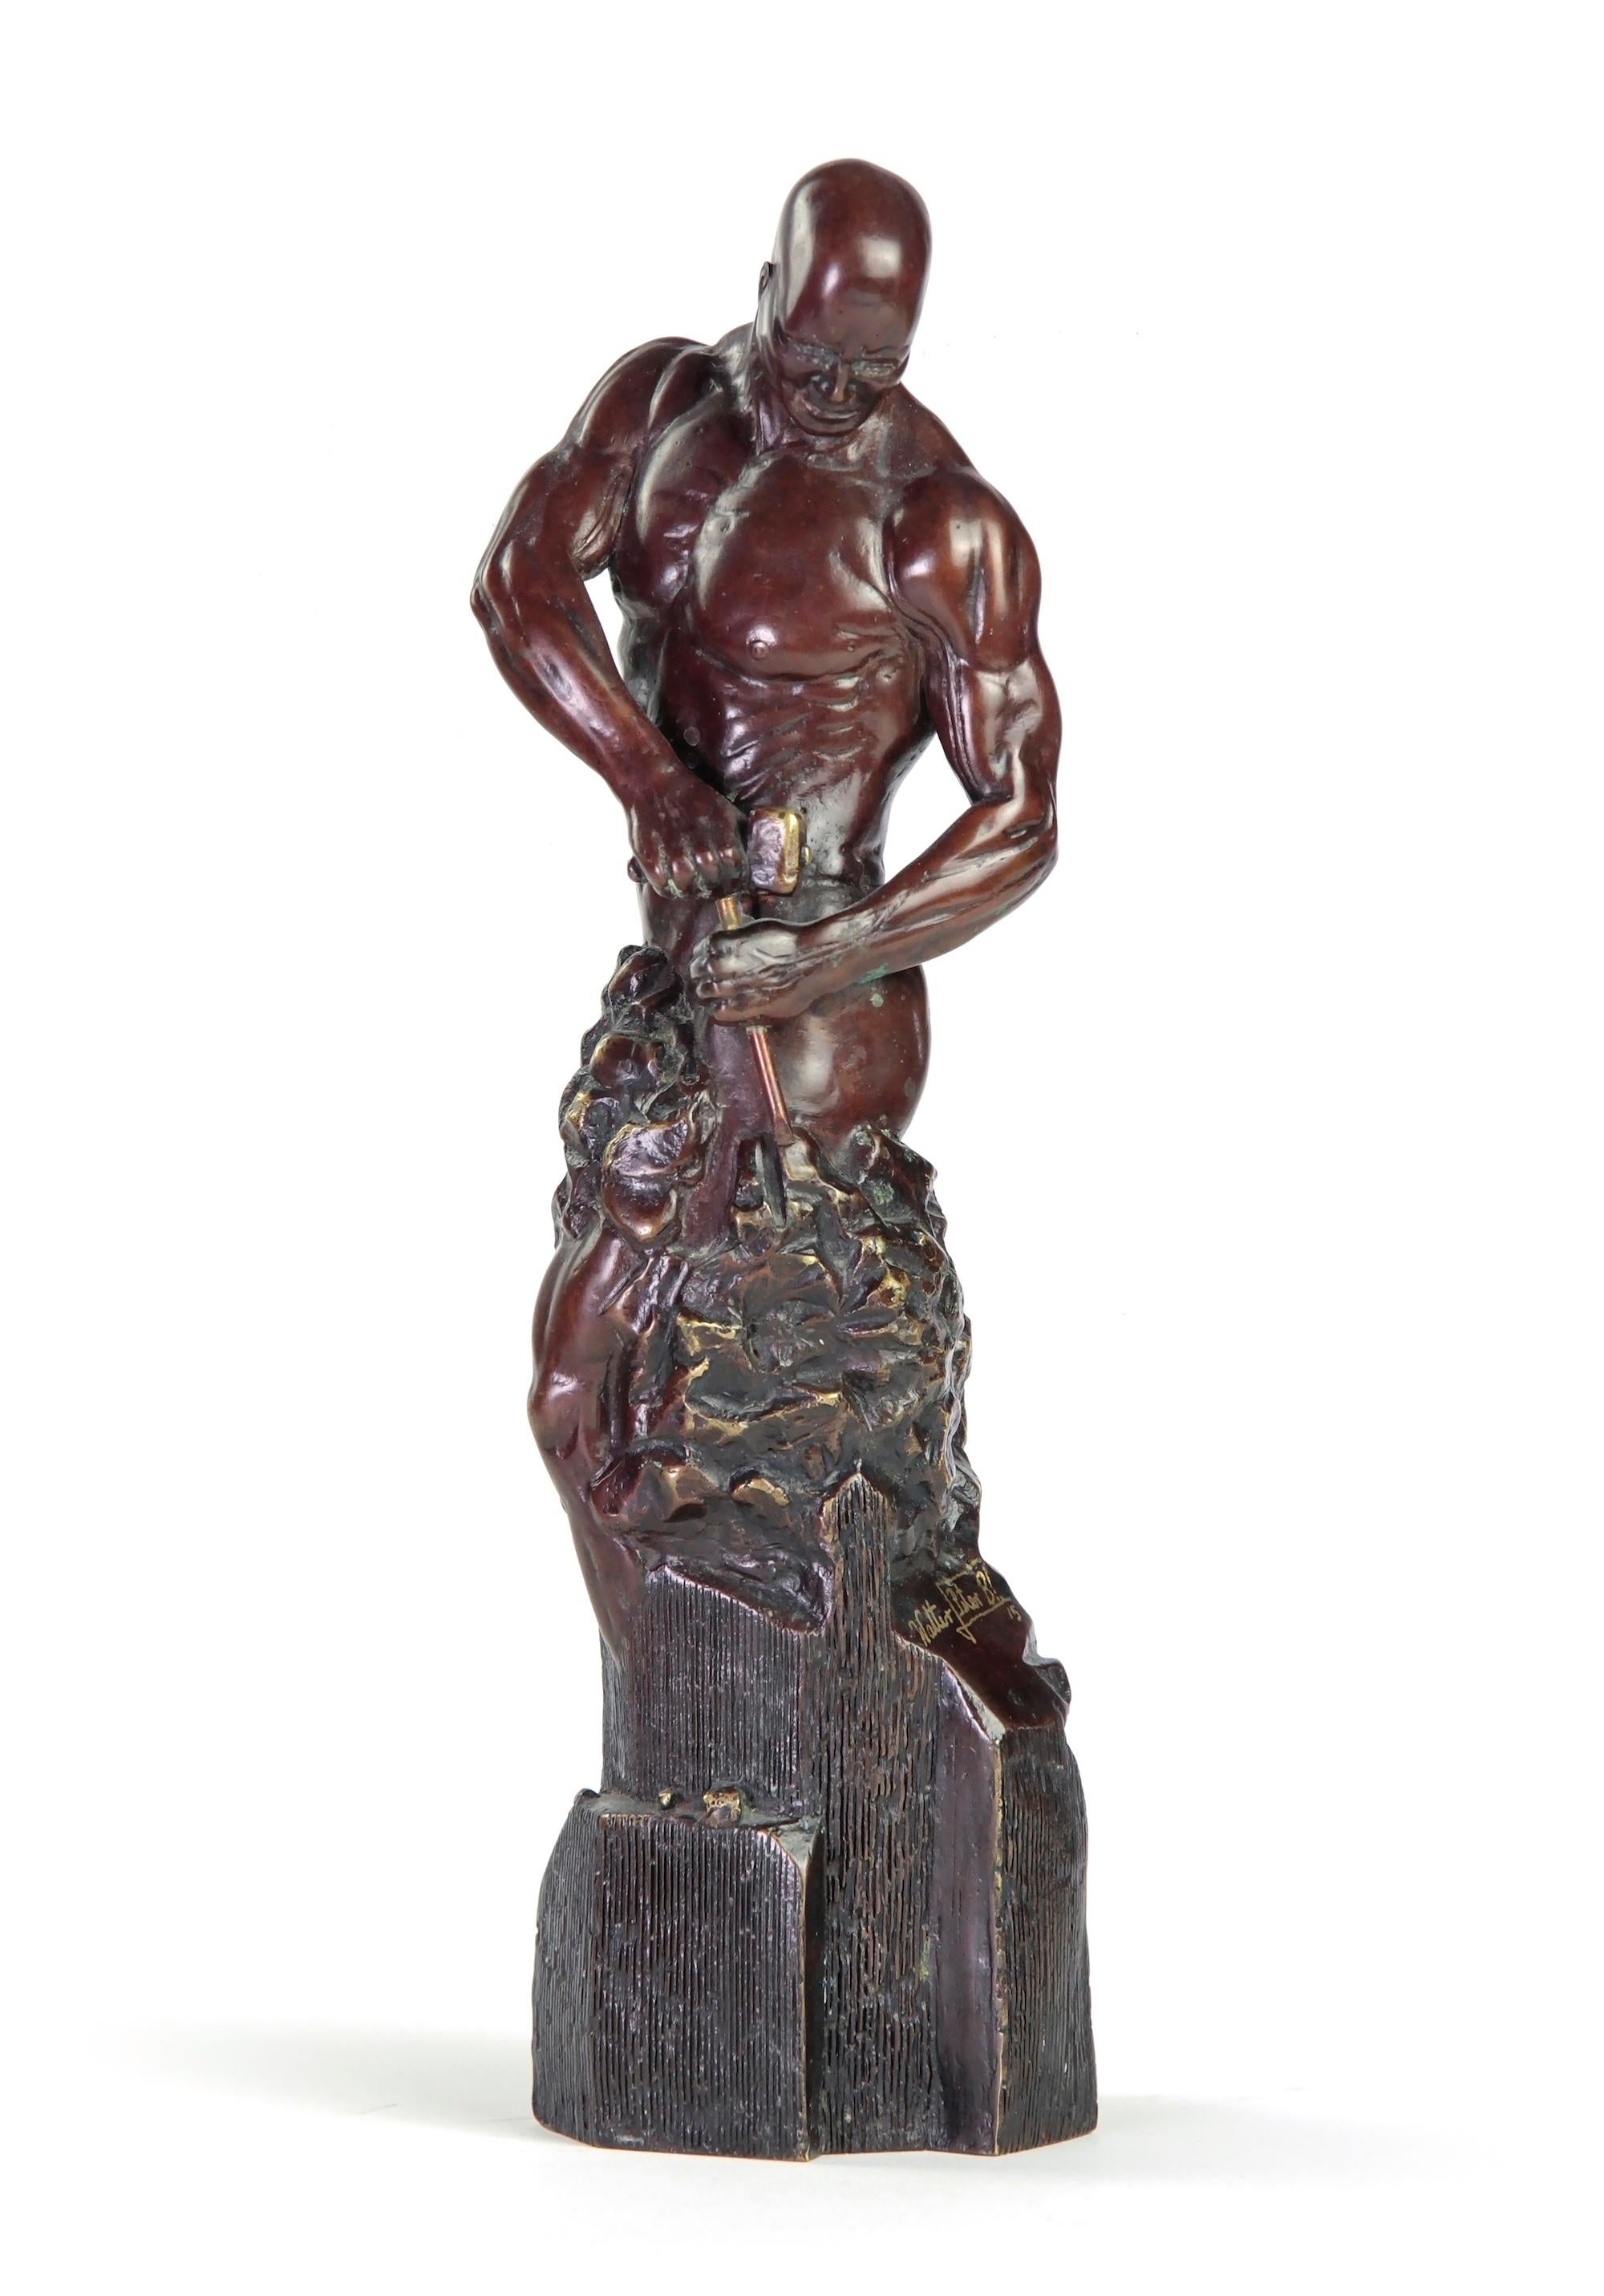 Walter Peter Brenner Nude Sculpture - Master of Your Own Destiny by Walter P. Brenner - Nude male bronze sculpture